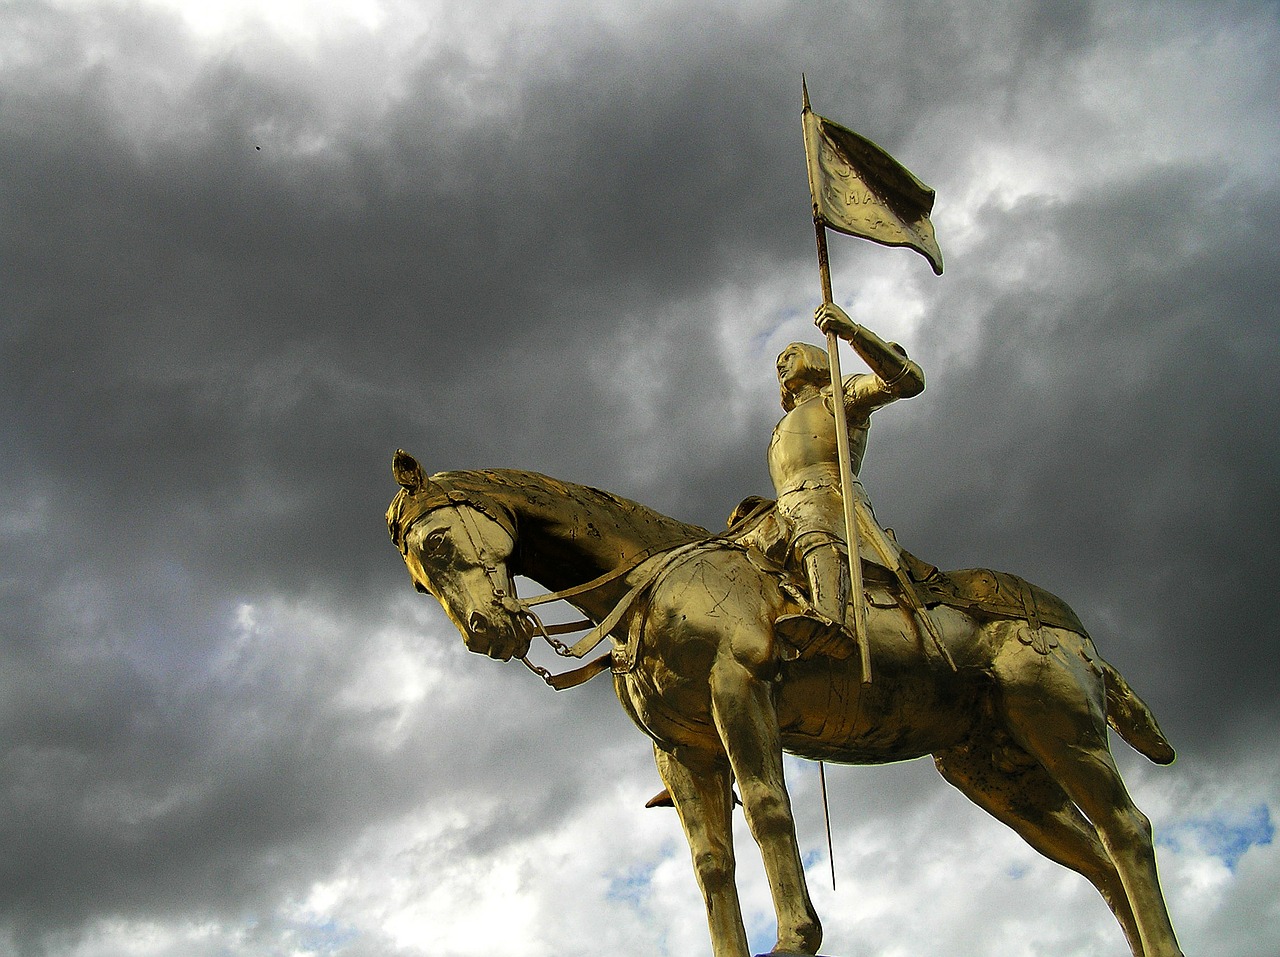 Statue of a knight riding a horse